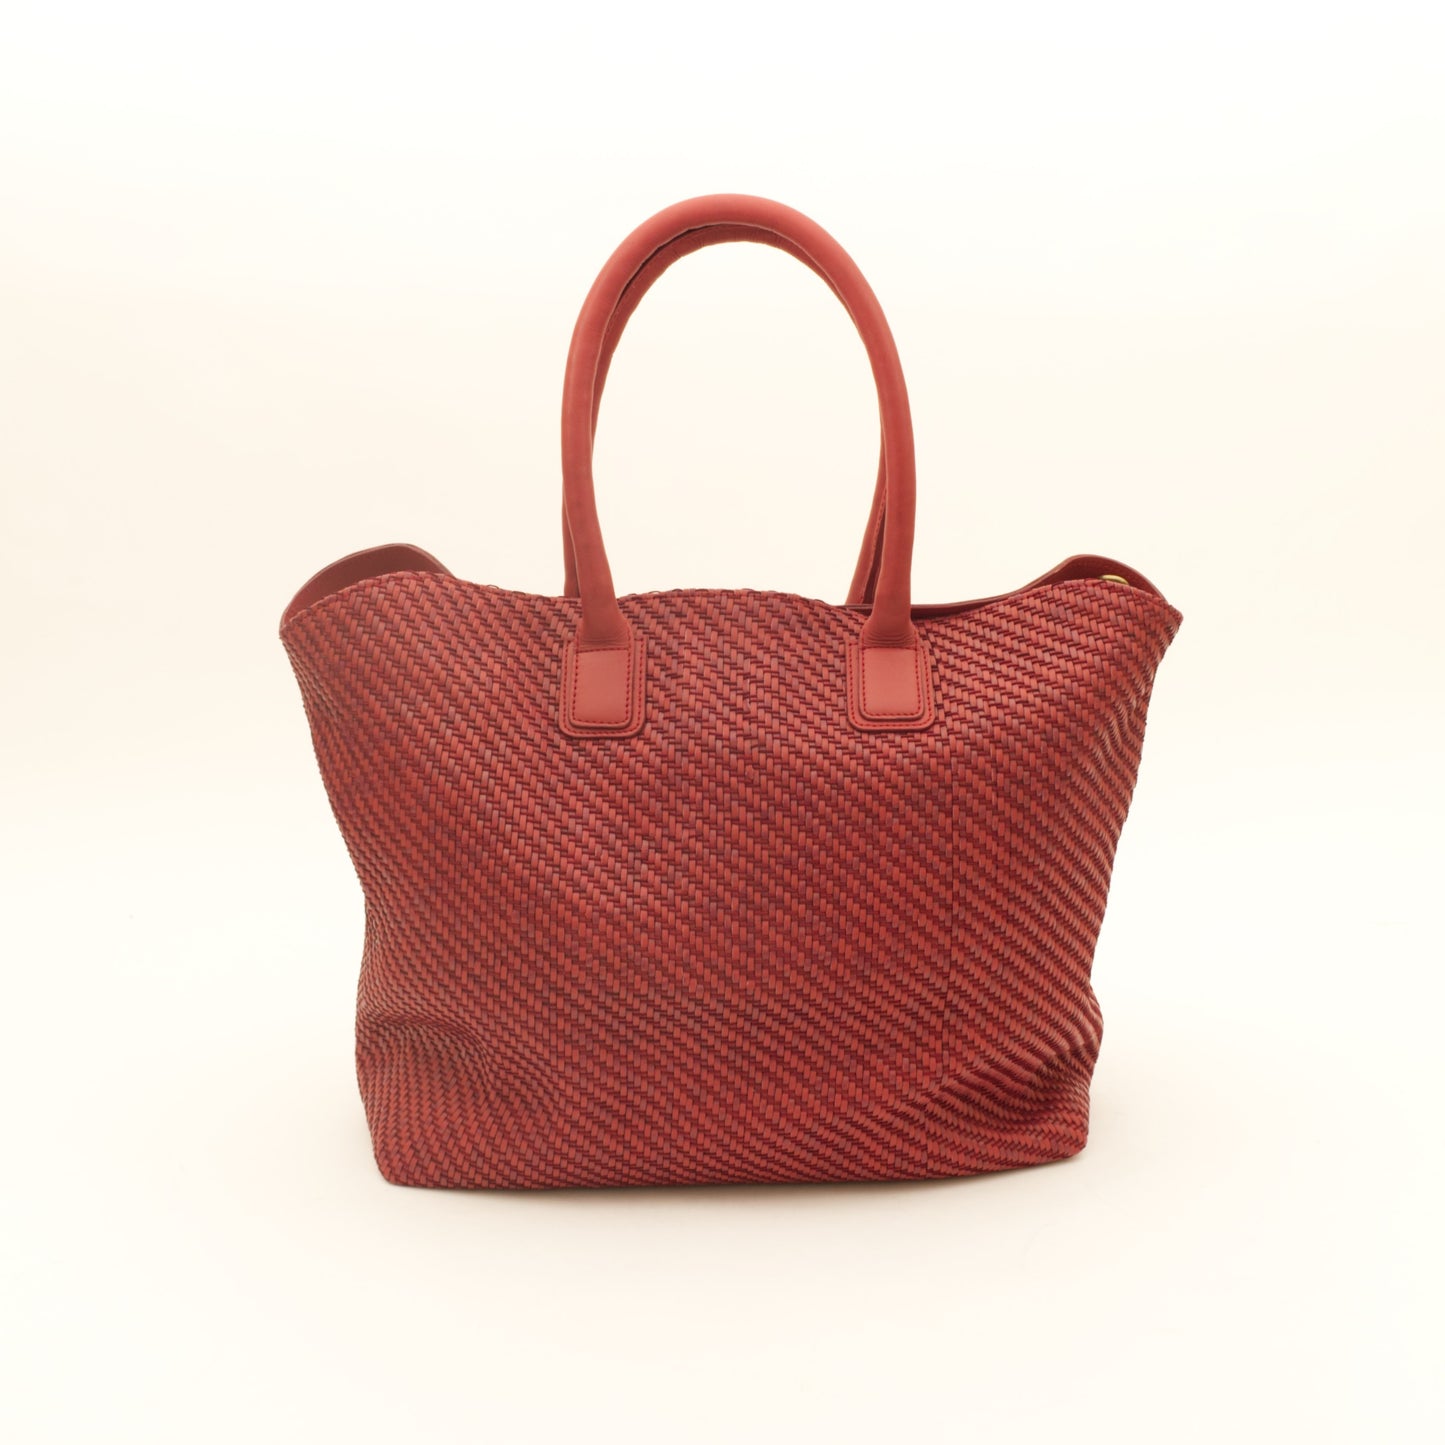 Apricity Hungry Tote